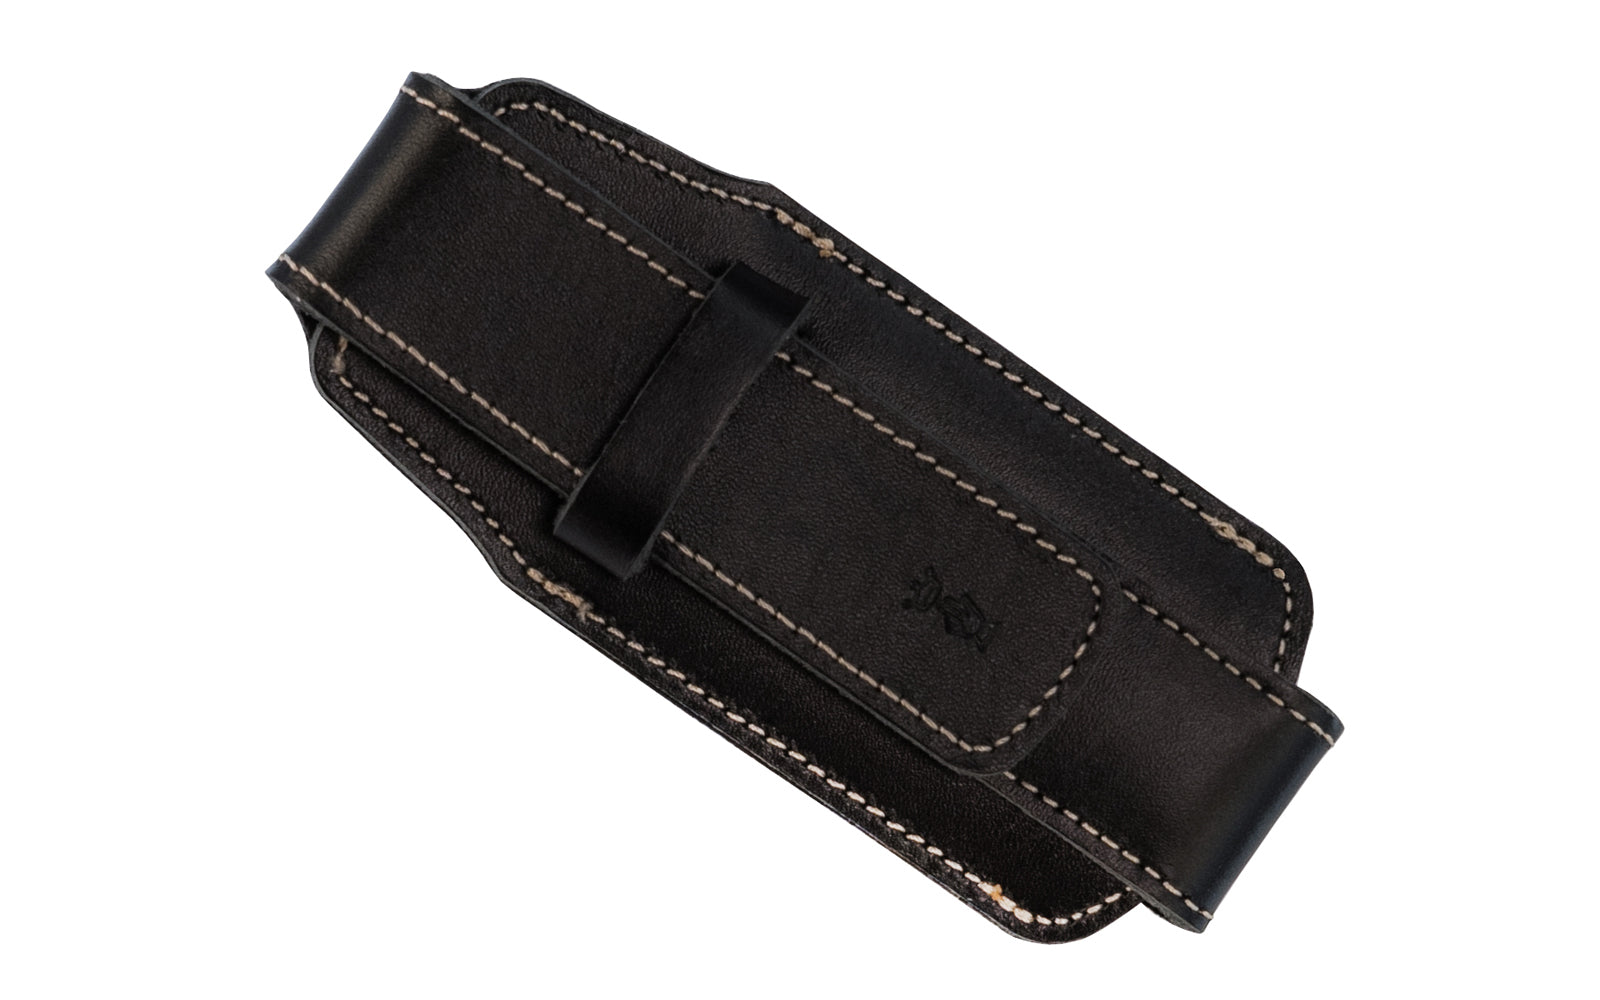 A very attractive Opinel "Chic" cowhide leather knife sheath in a stylish black color. Will fit the traditional No. 7, 8, & 9  knives, as well as the No. 8 & No. 10  slim knives. Sheath can be closed with the belt loop to protect knives in place, & on the back of the sheath is a vertical belt loop.